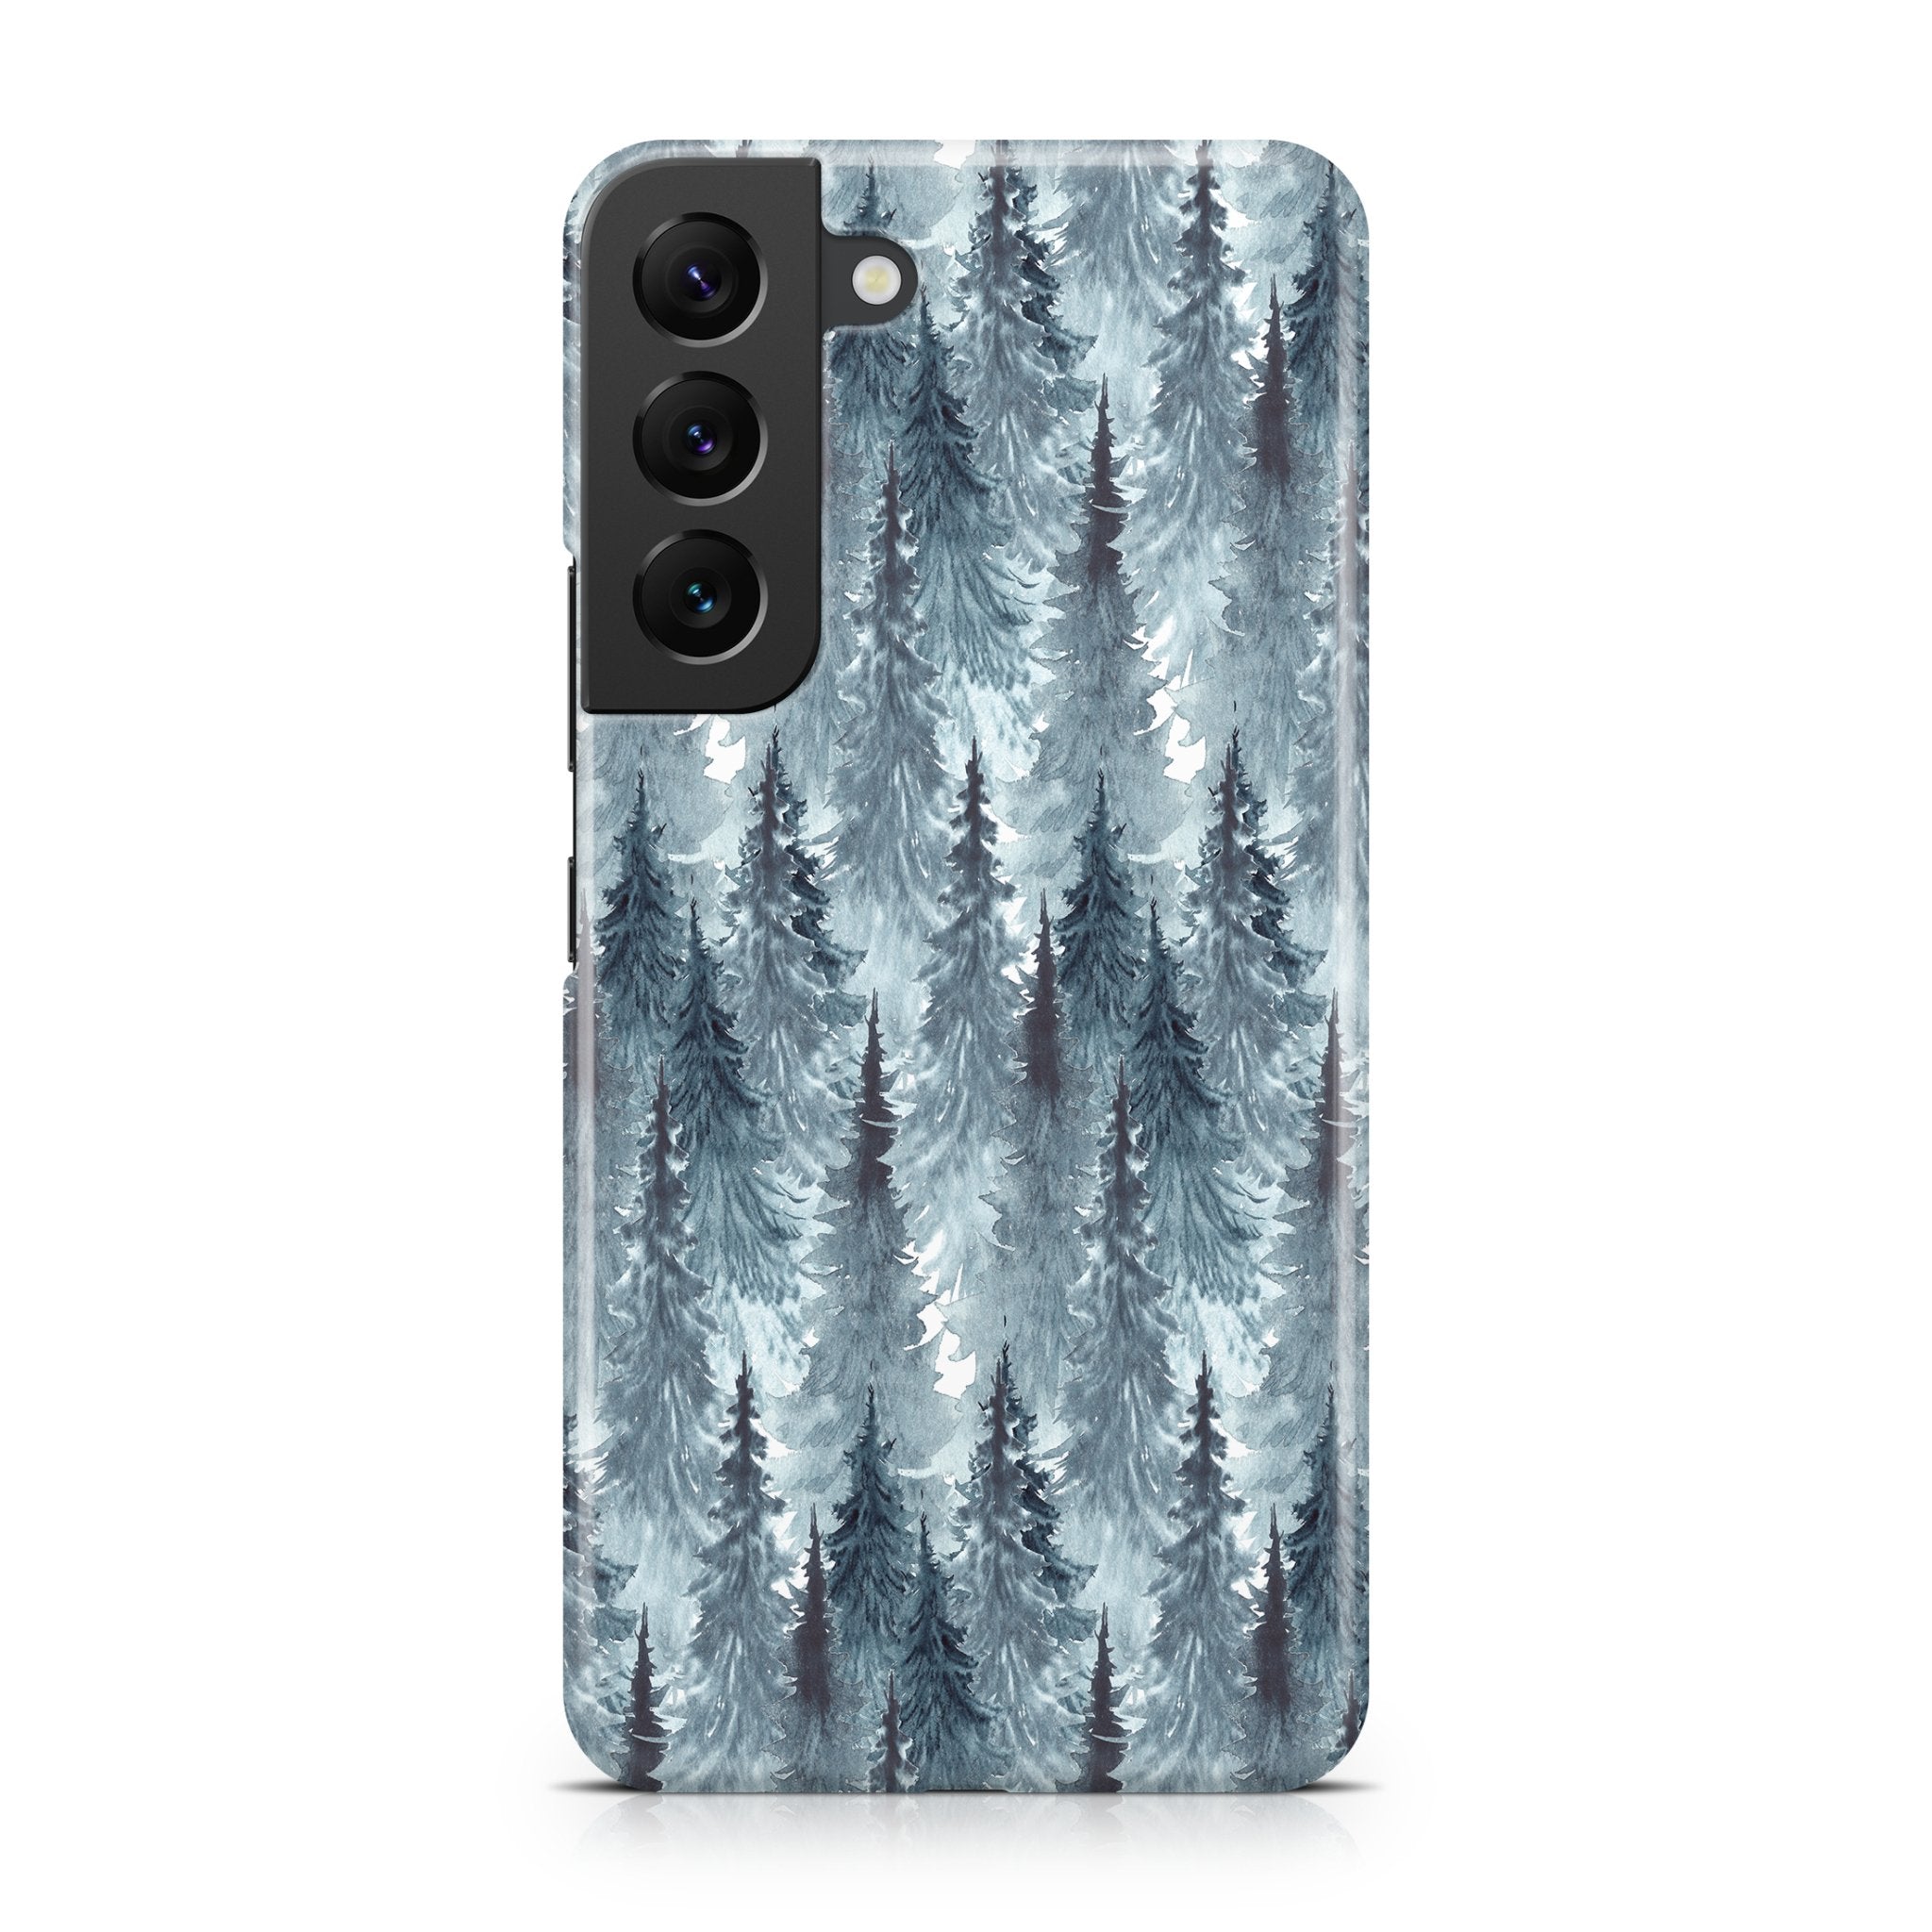 Winter Forest II - Samsung phone case designs by CaseSwagger